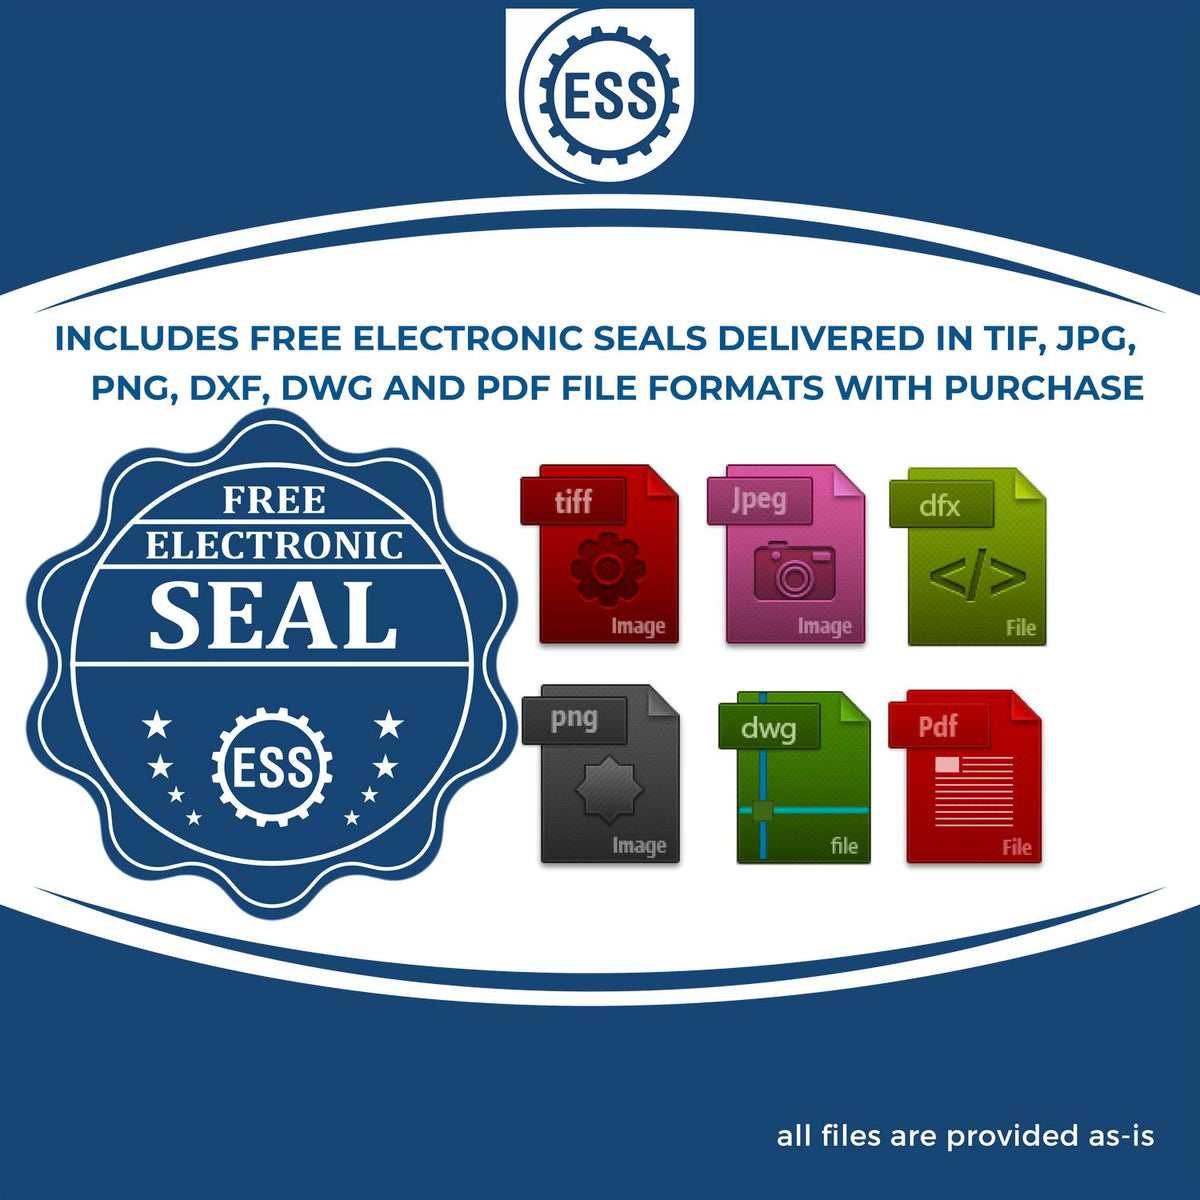 An infographic for the free electronic seal for the Handheld Nevada Professional Geologist Embosser illustrating the different file type icons such as DXF, DWG, TIF, JPG and PNG.